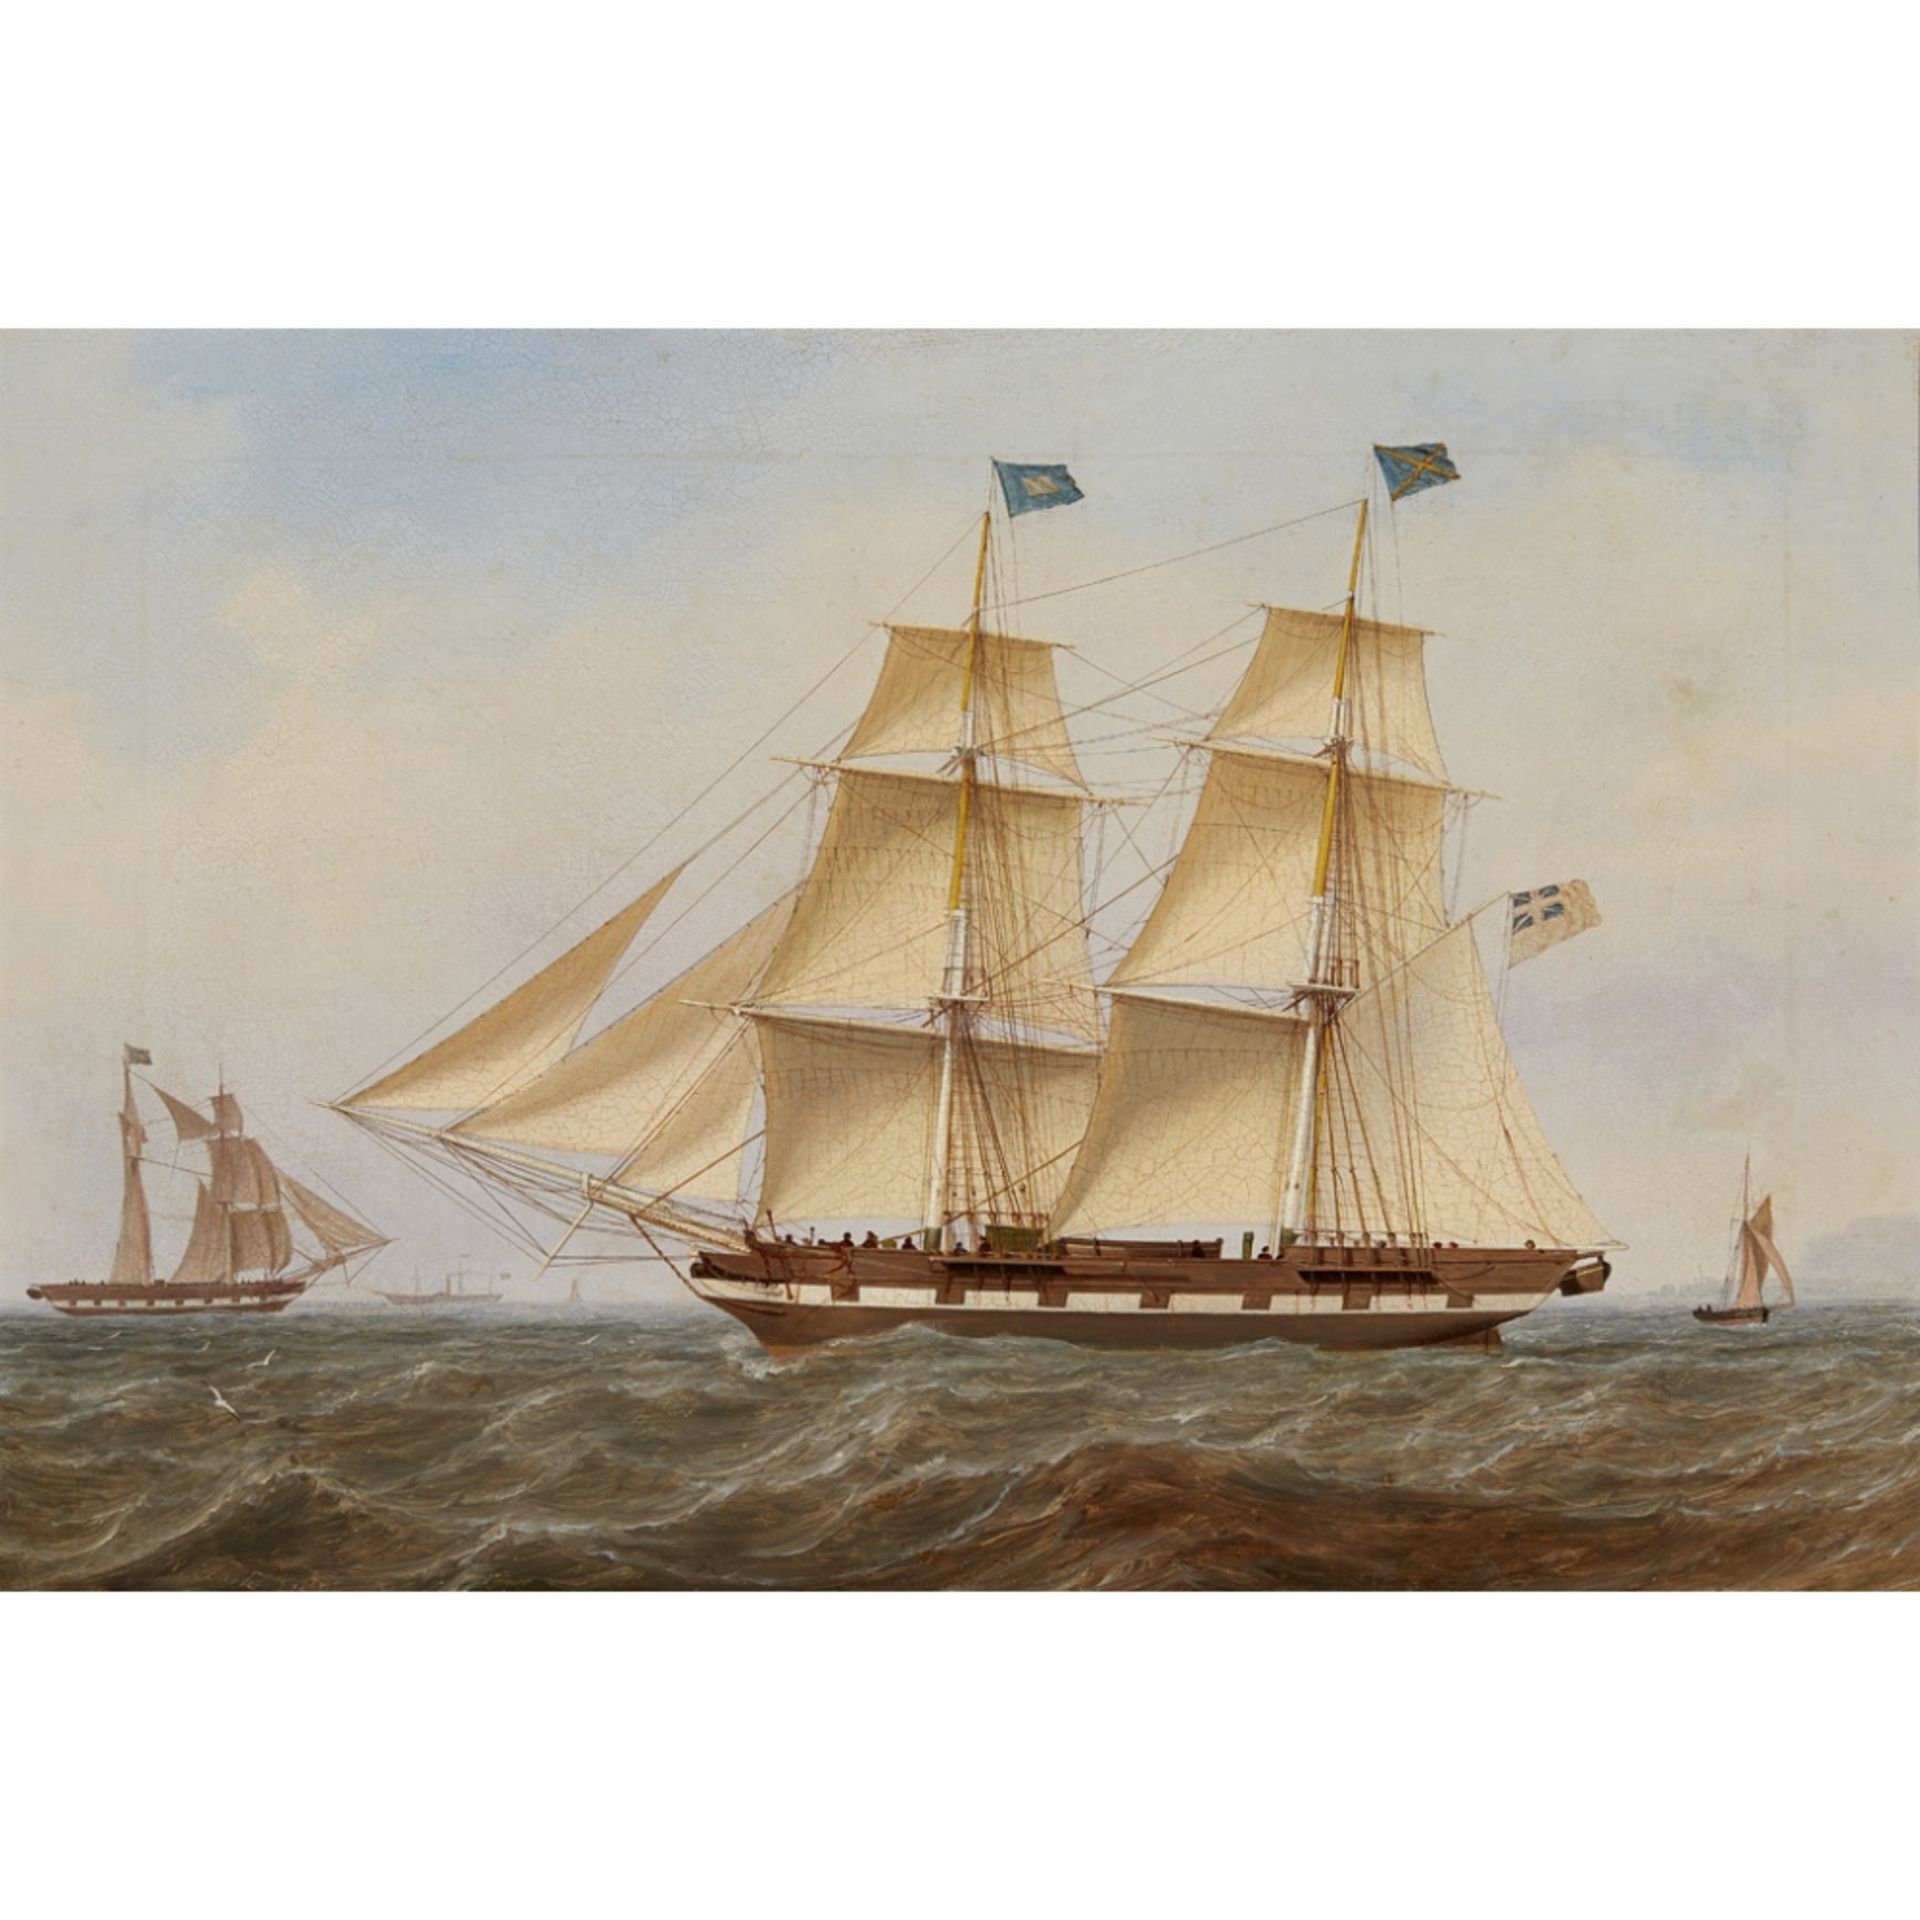 WILLIAM CLARK OF GREENOCK (SCOTTISH 1803-1883)SHIPPING IN CALM SEAS Signed and dated 1859, oil on